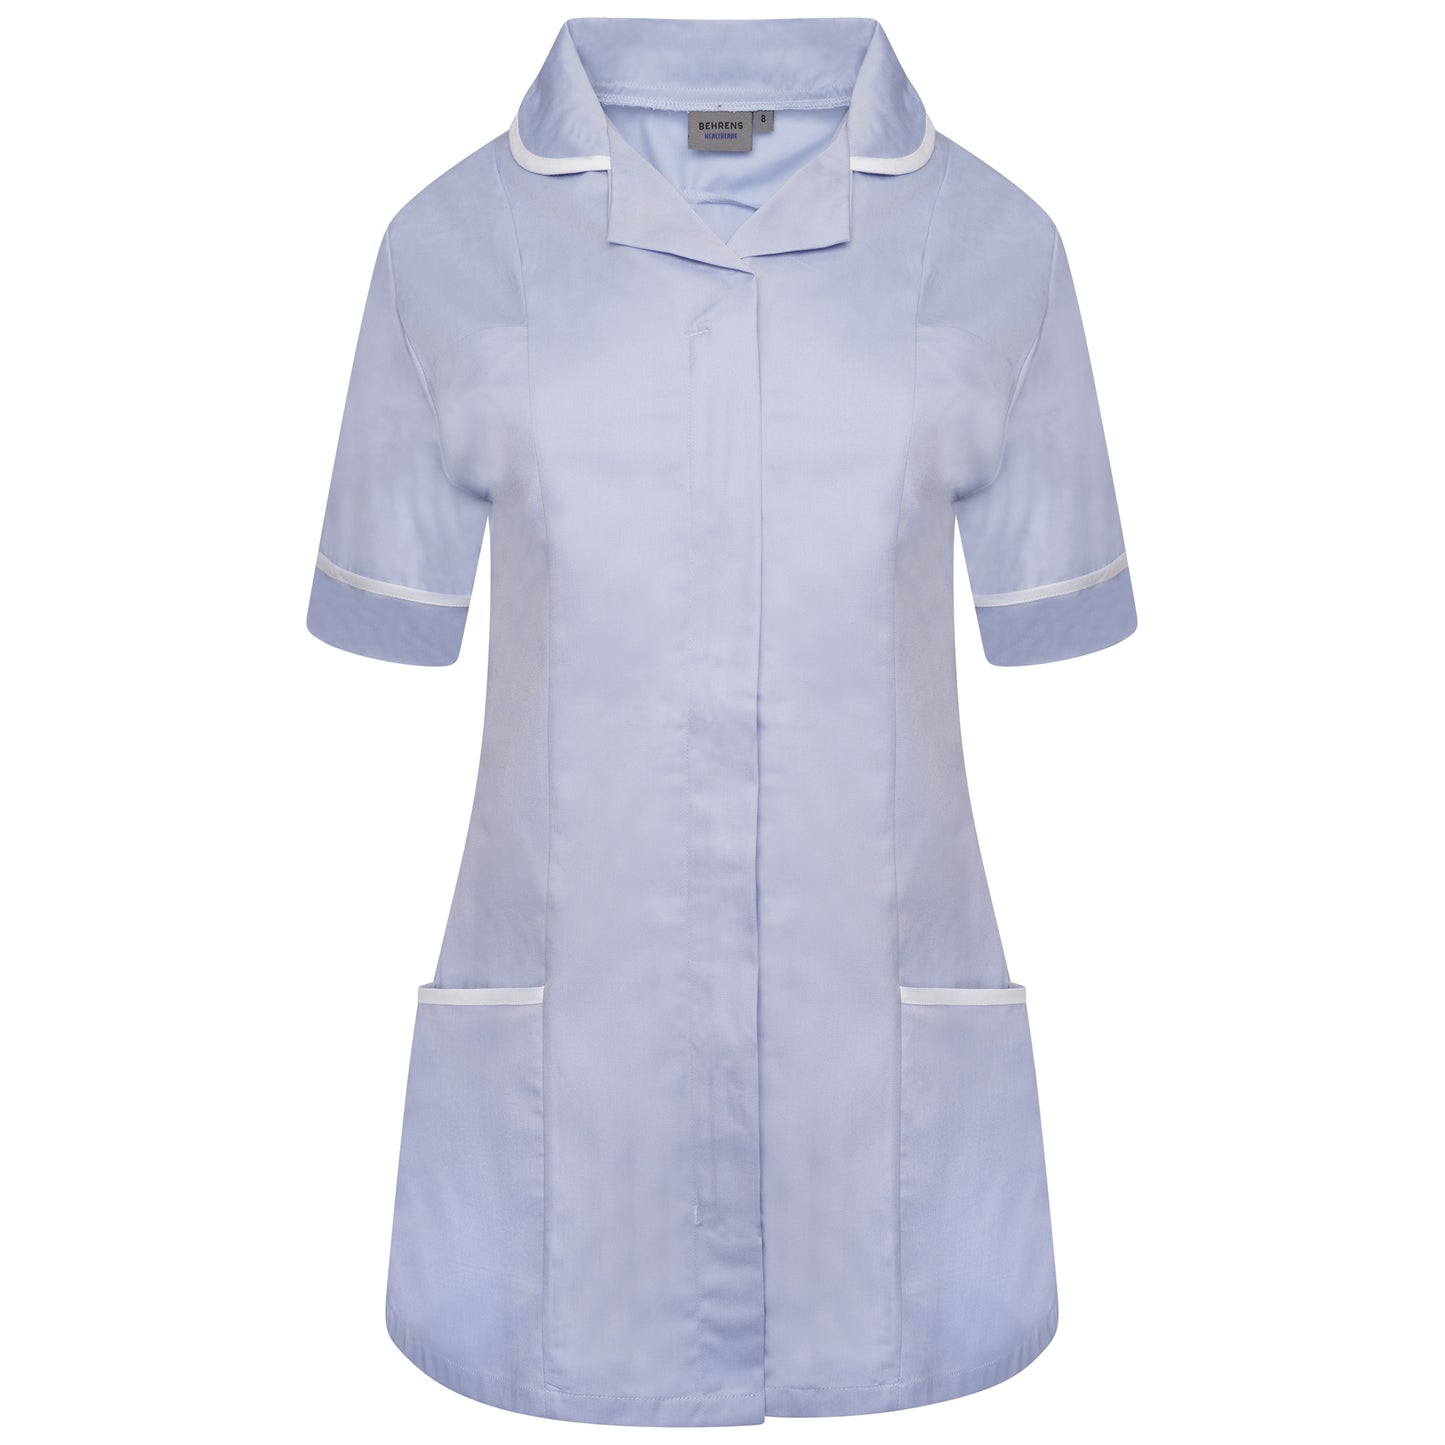 Behrens Sky/White Trim Ladies Tunic With Round Collar - NCLTPS / SWT